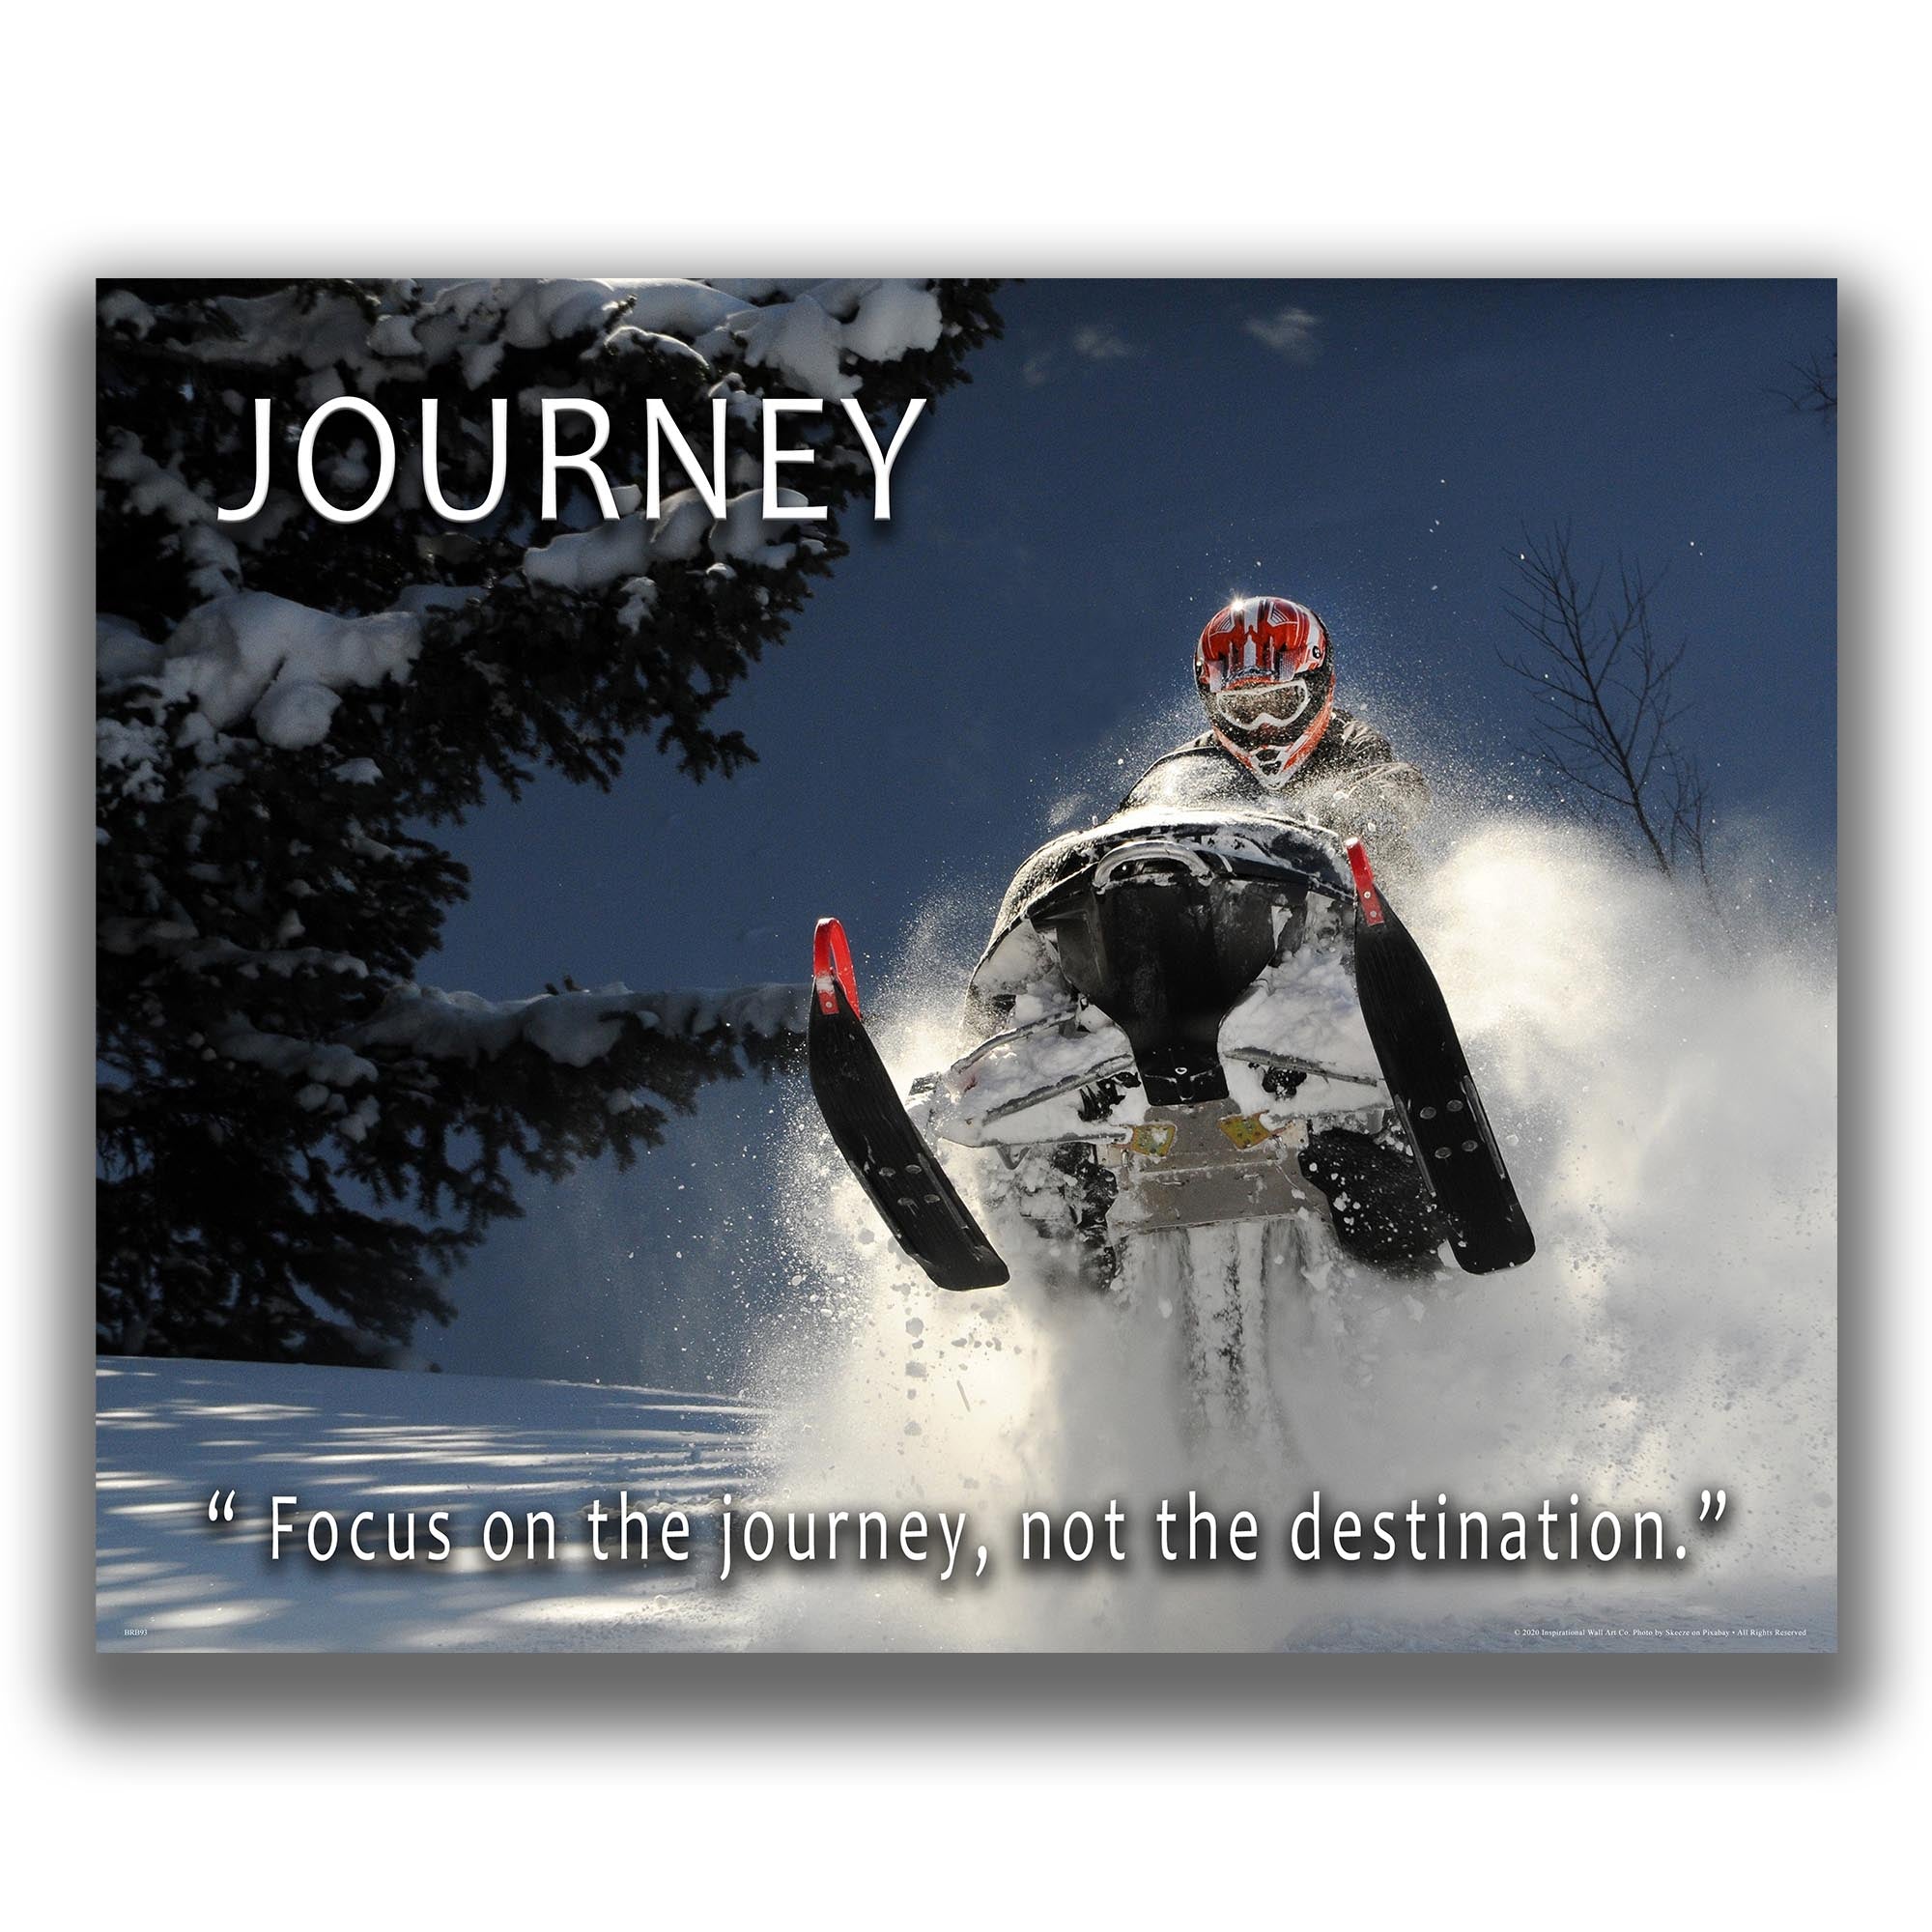 Journey - Snowmobile Poster